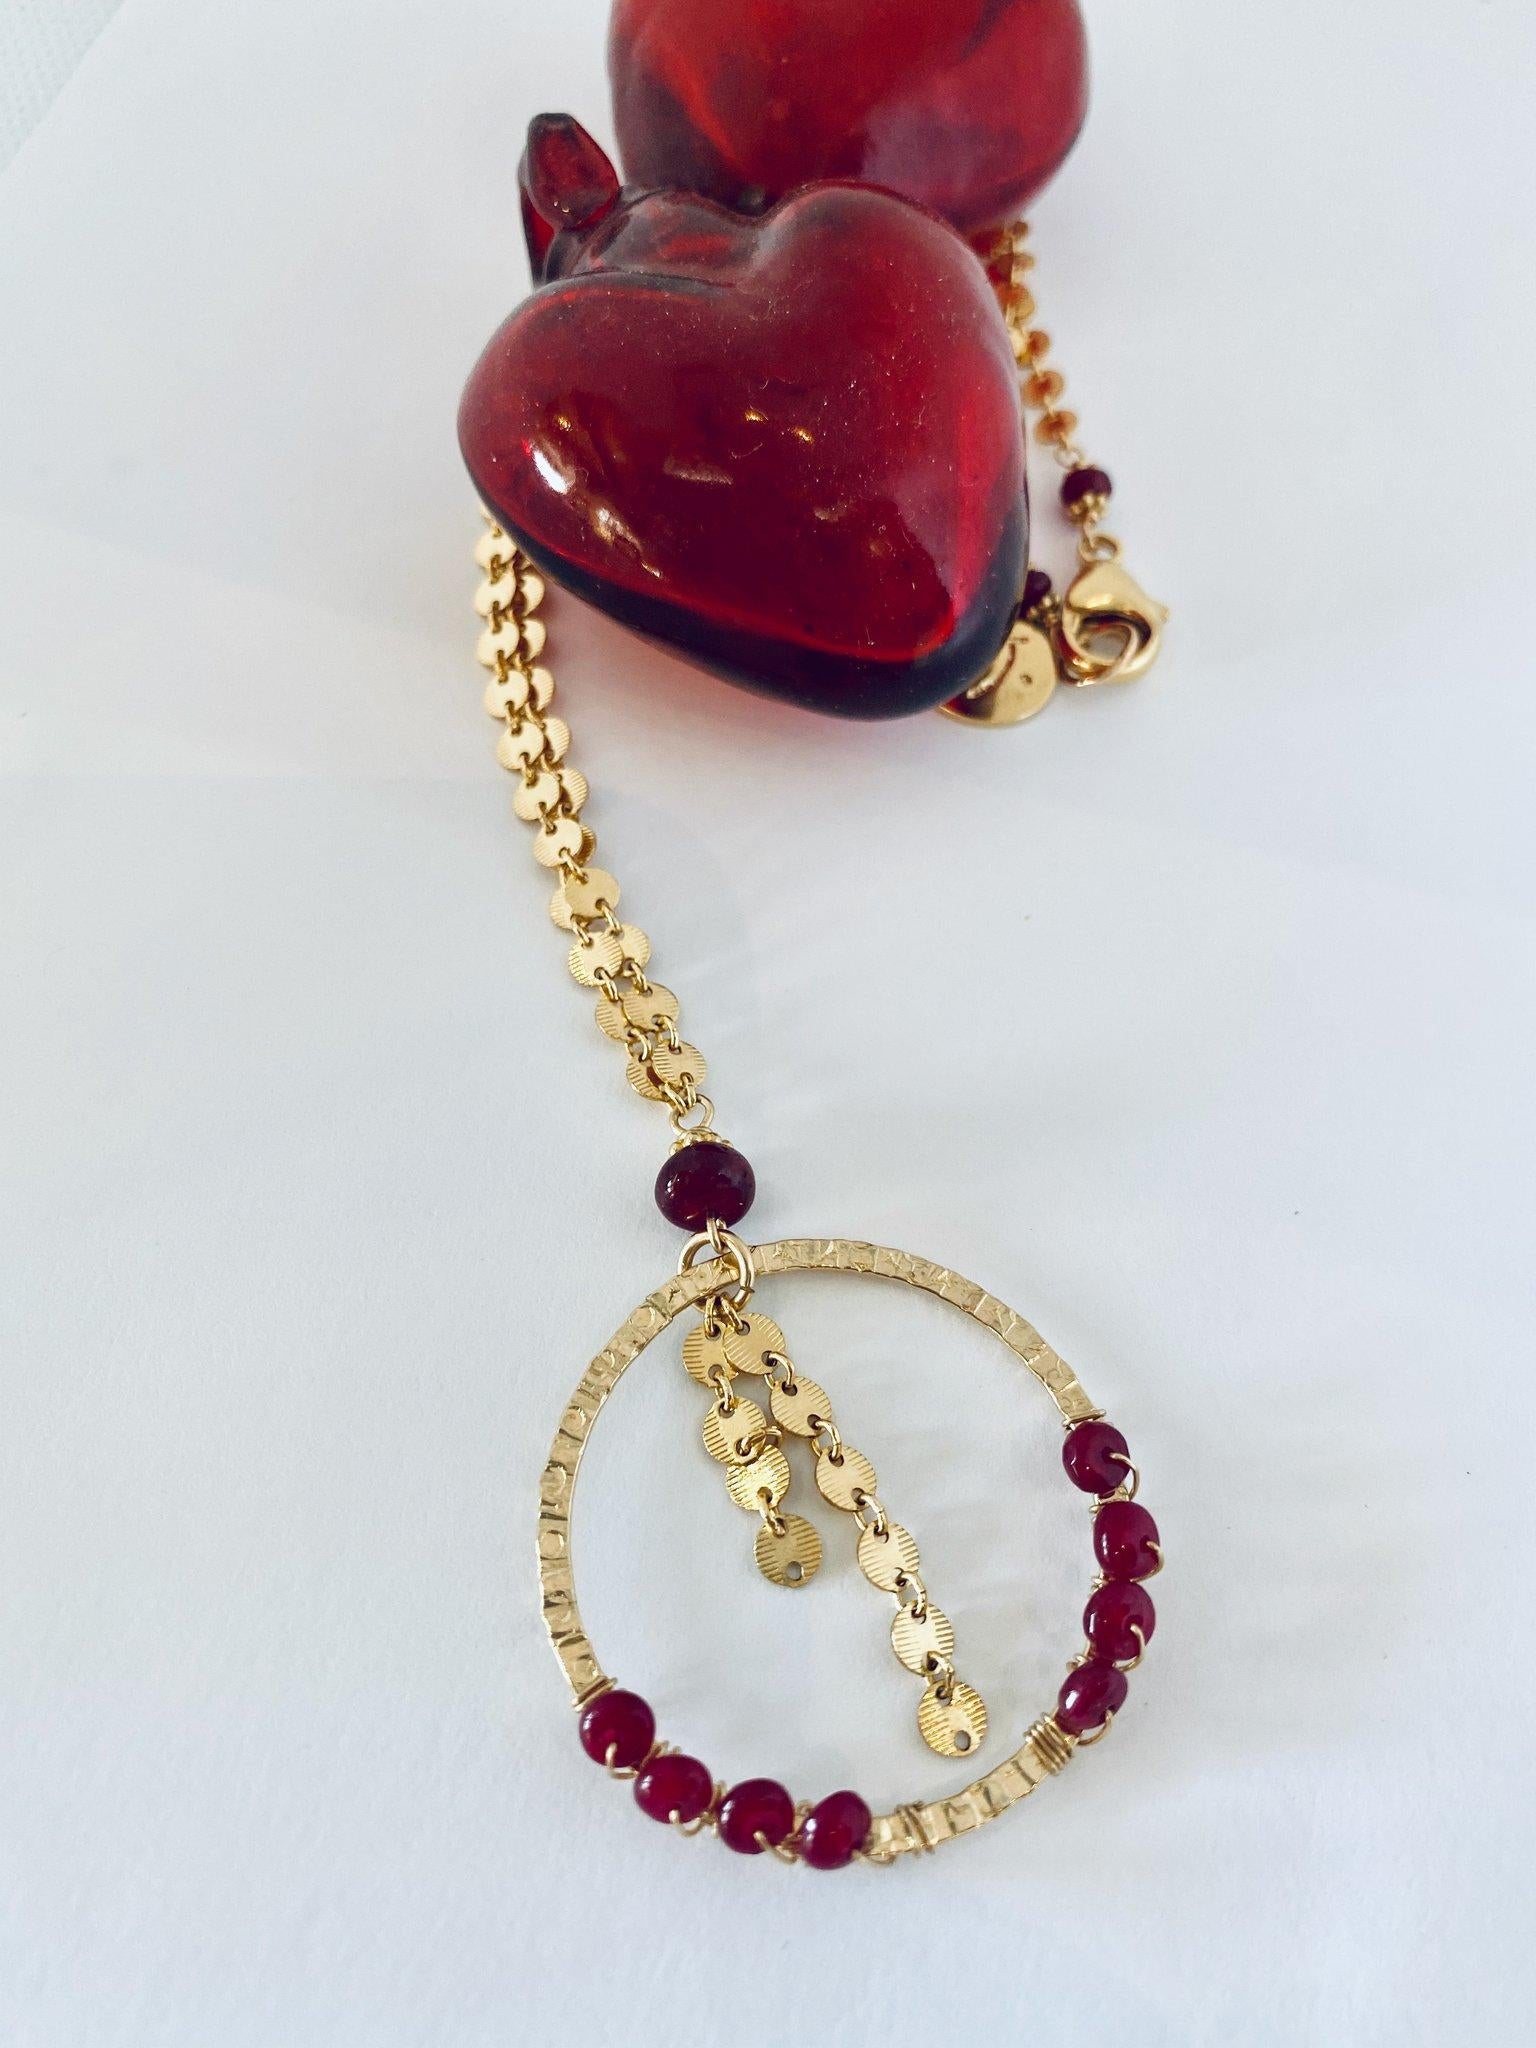 Story Behind the Jewelry
The 14K gold ruby necklace was designed with circles, which are a universal symbol for endless meaning.  We have used circles in our Valentine's Collection as a symbol of endless love.  Our collection represents all types of